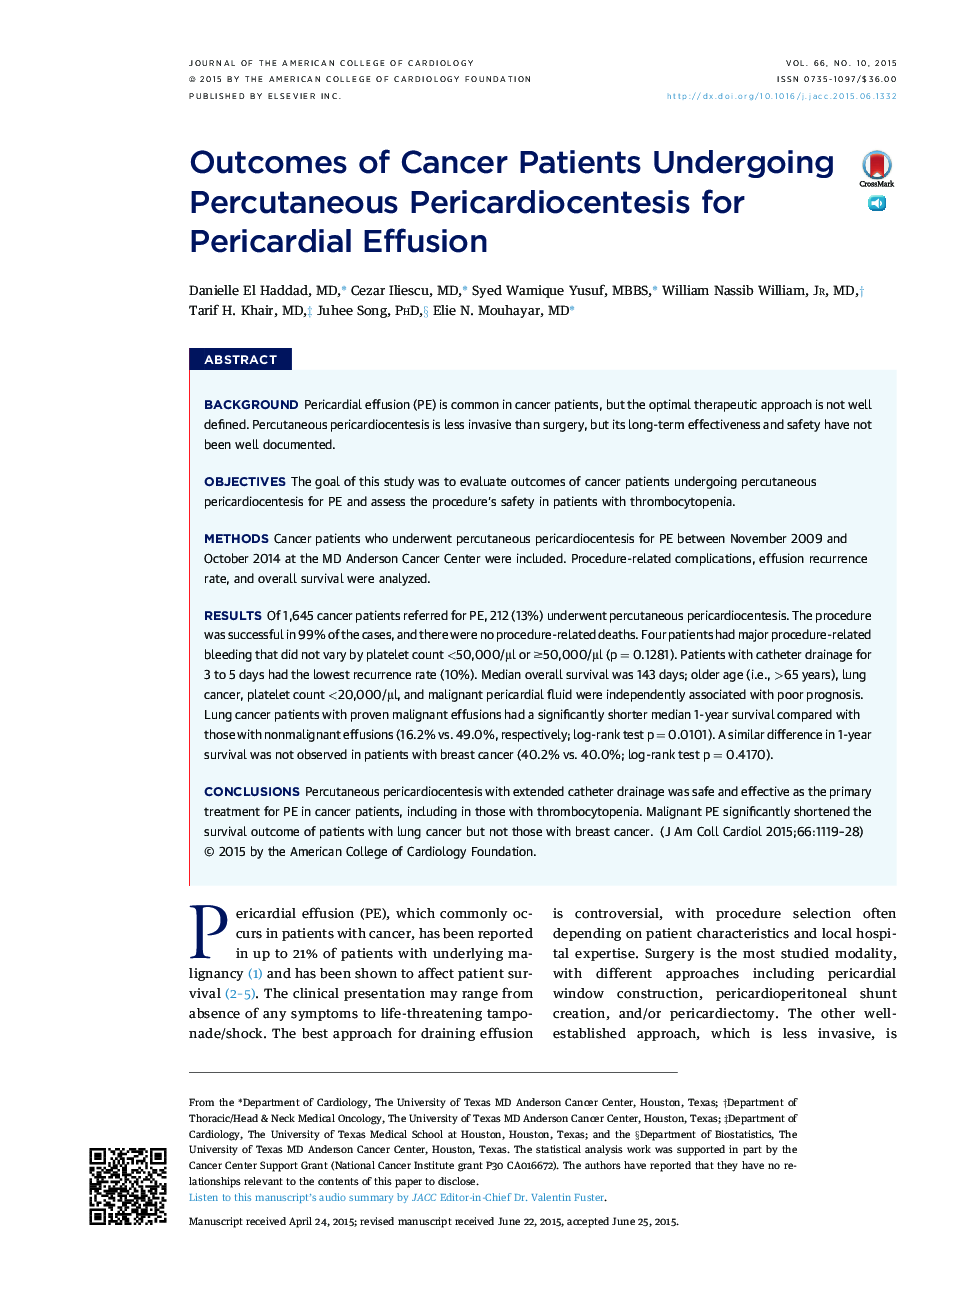 Outcomes of Cancer Patients Undergoing Percutaneous Pericardiocentesis for Pericardial Effusion 